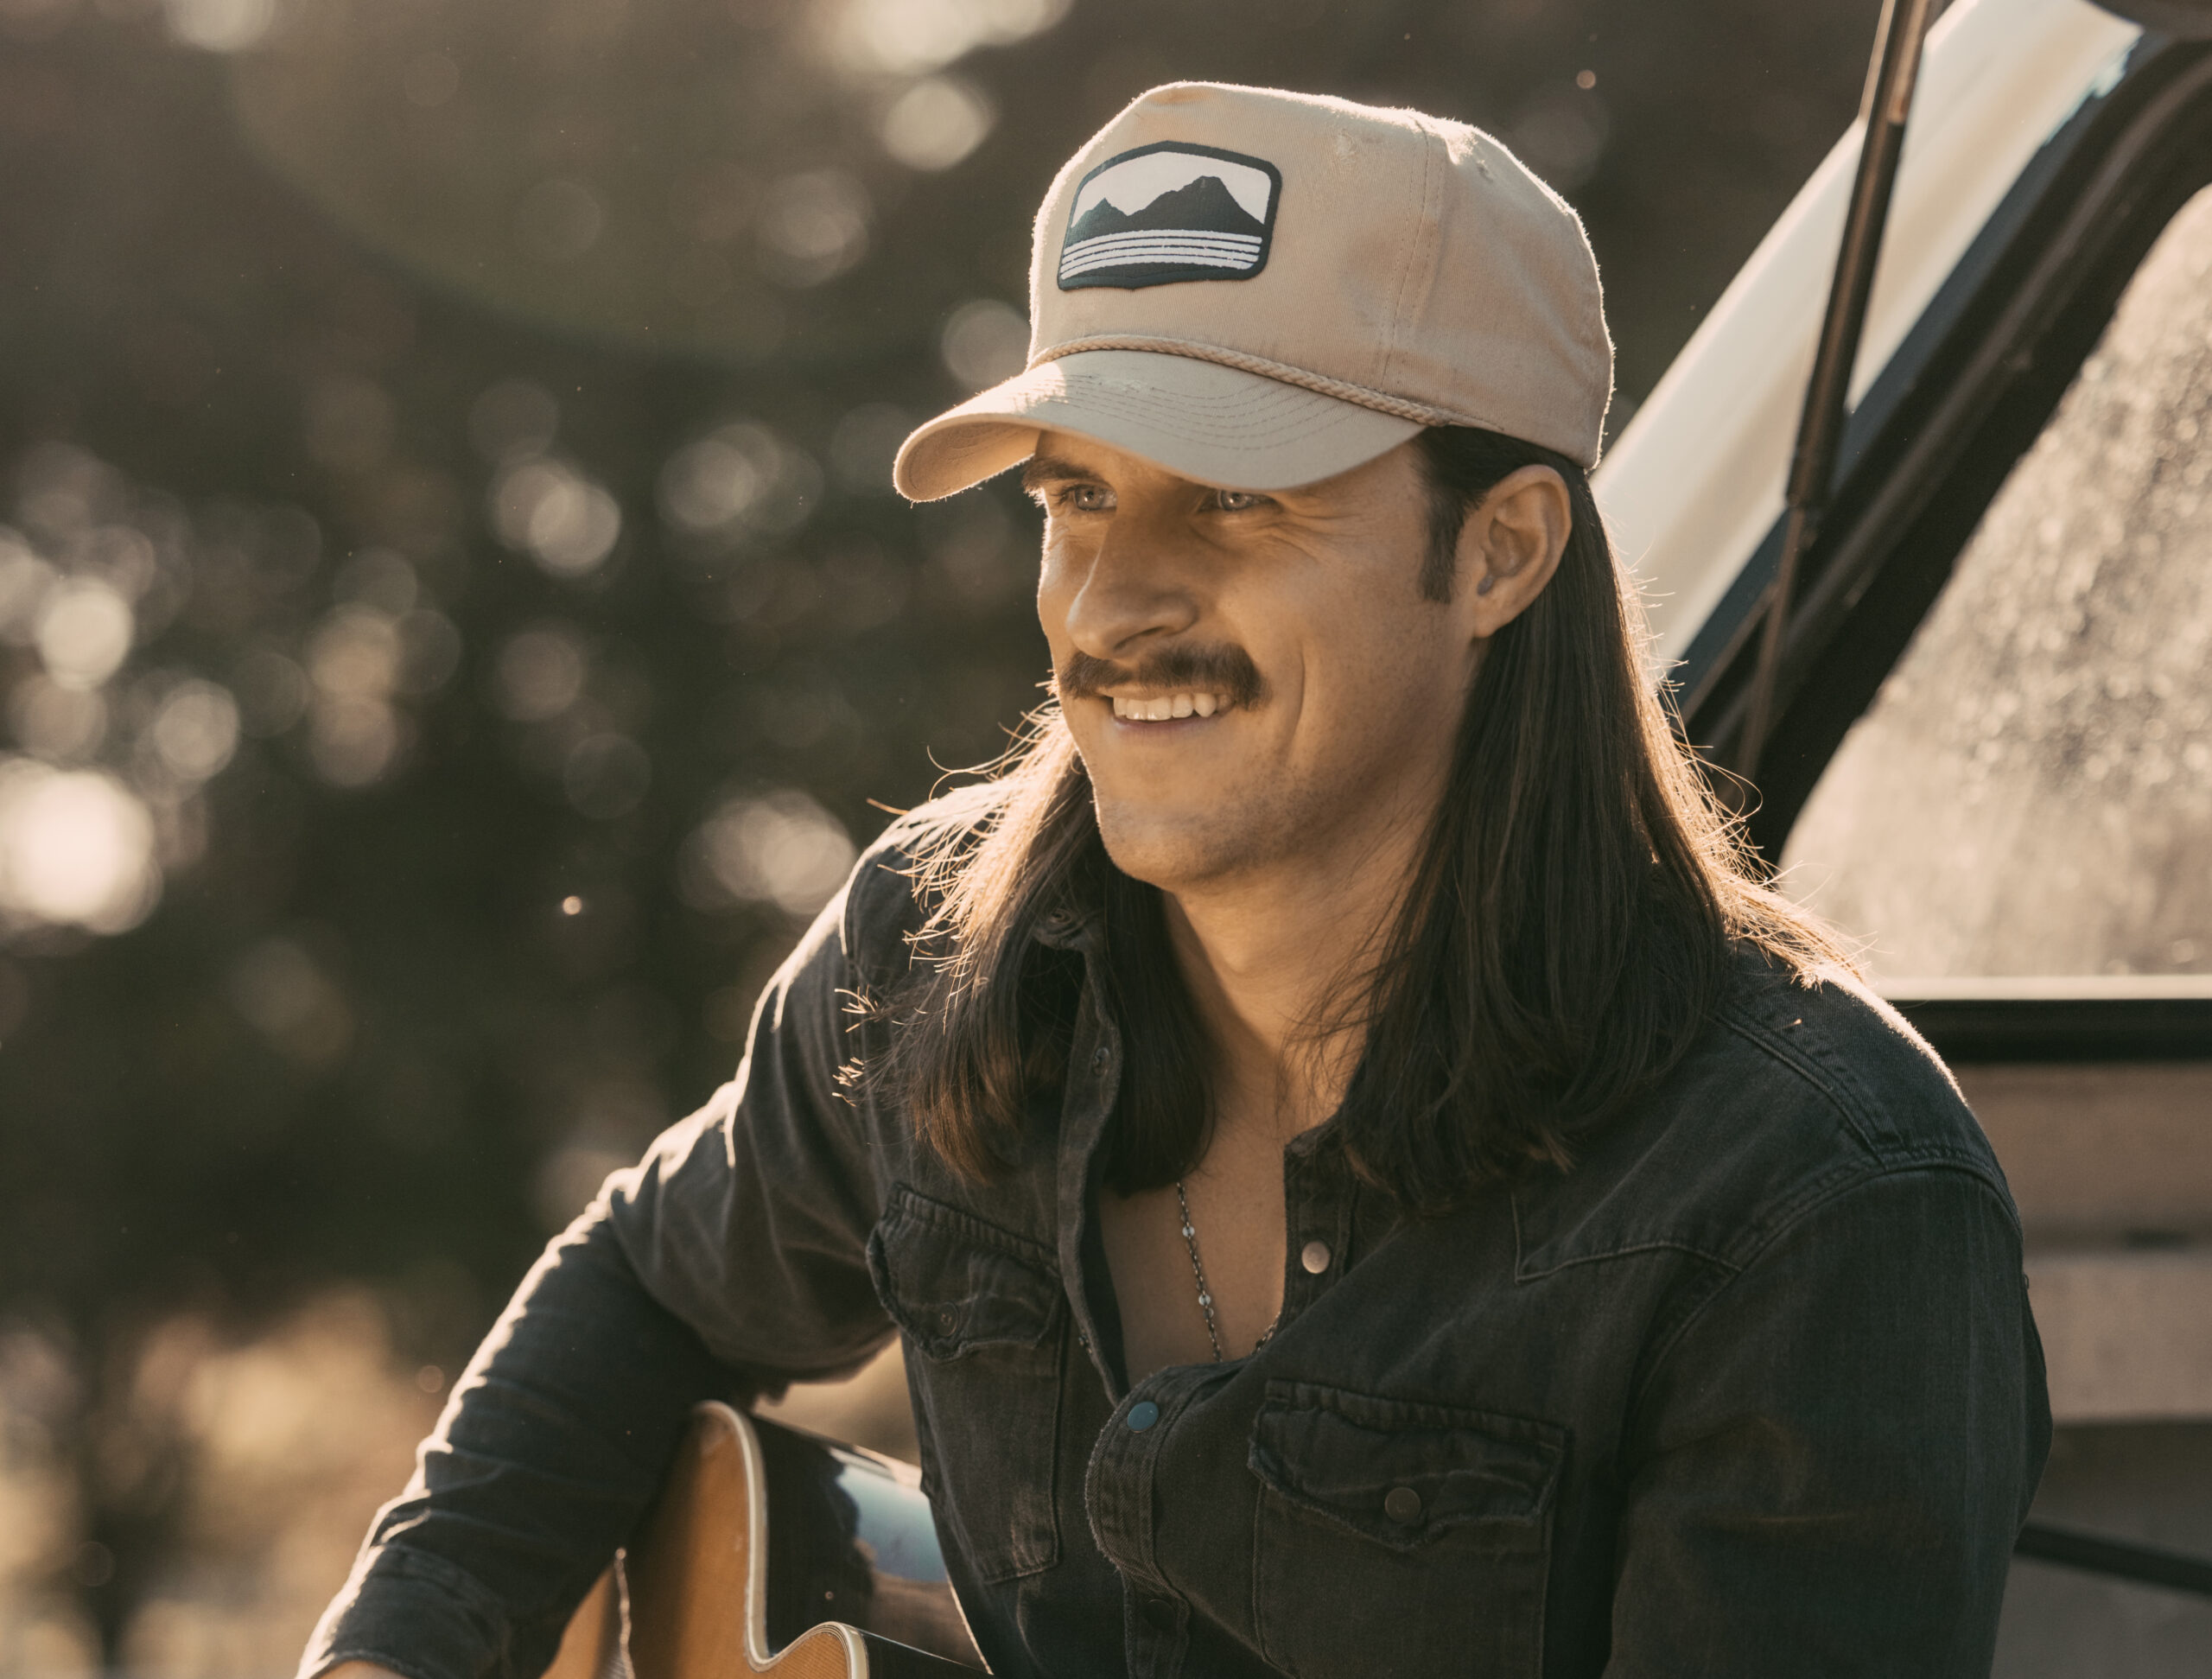 John Morgan Pays Tribute to His Rugged Country Roots with New Single “Sorry Not Sorry” (Listen)